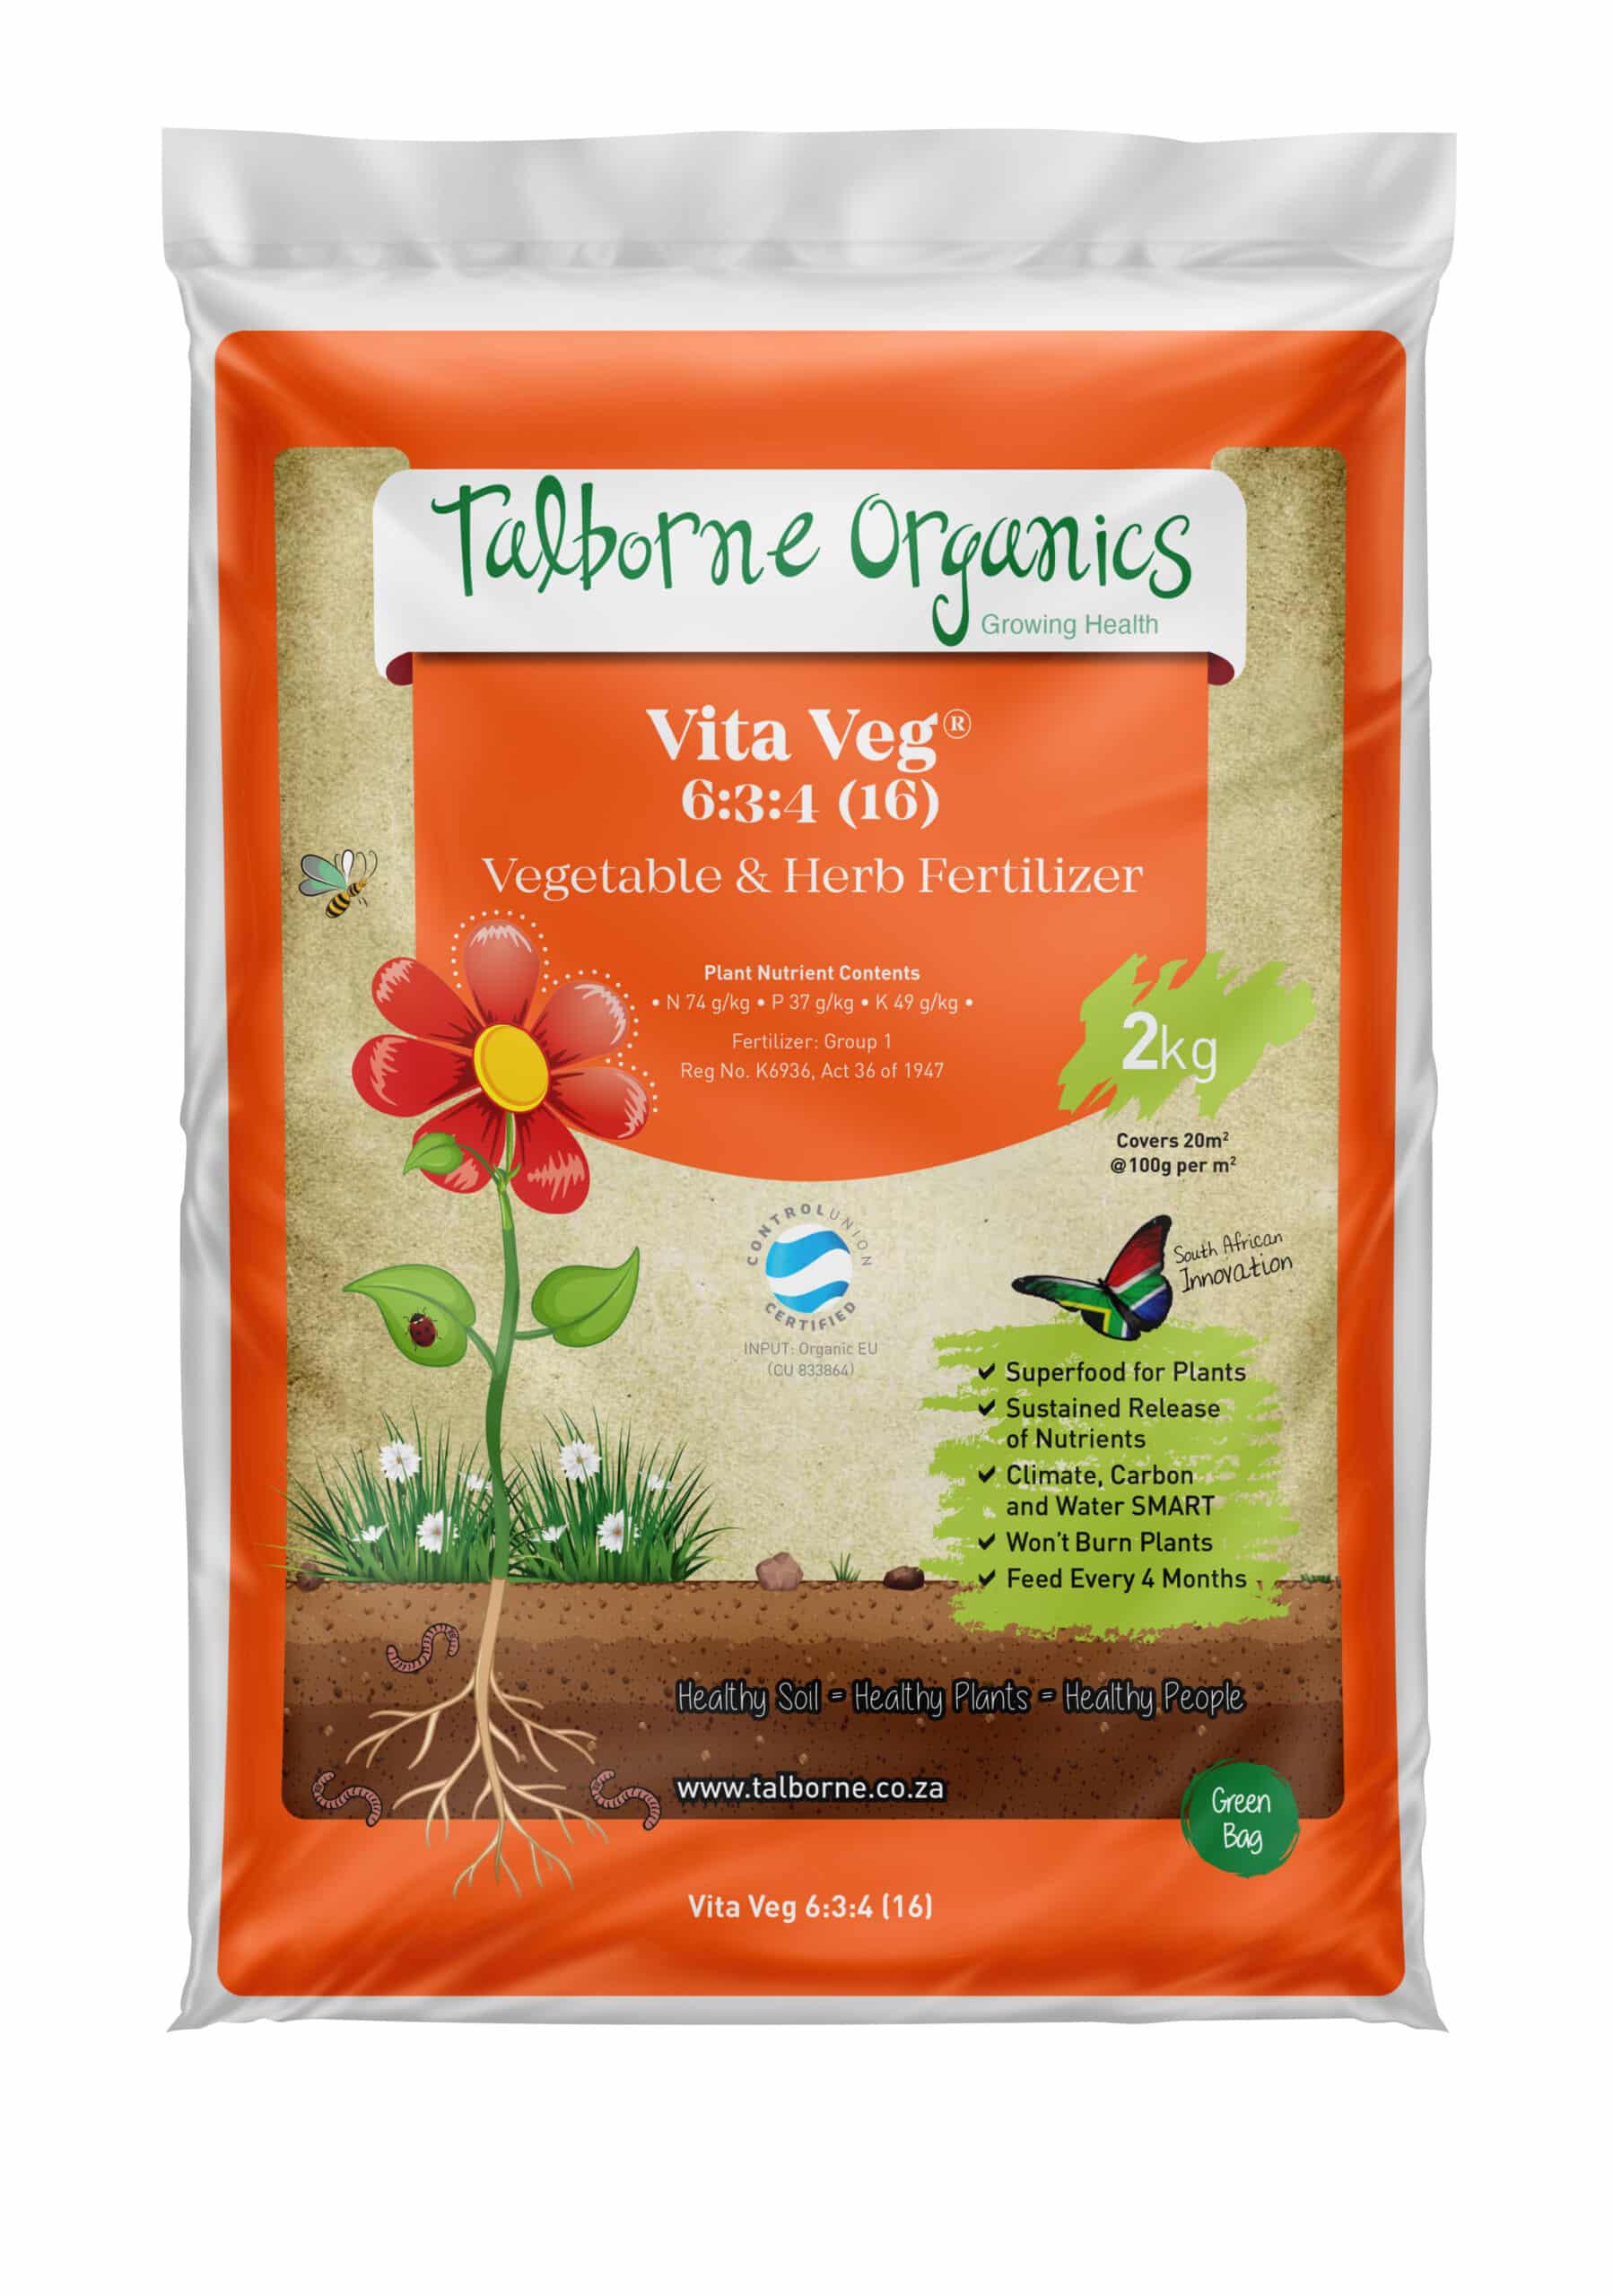 Orange 2kg bag of Talborne Organics Vita Veg 6:3:4 (16) vegetable and herb fertiliser, suitable for plants, sustained release of nutrients, climate carbon and water smart.